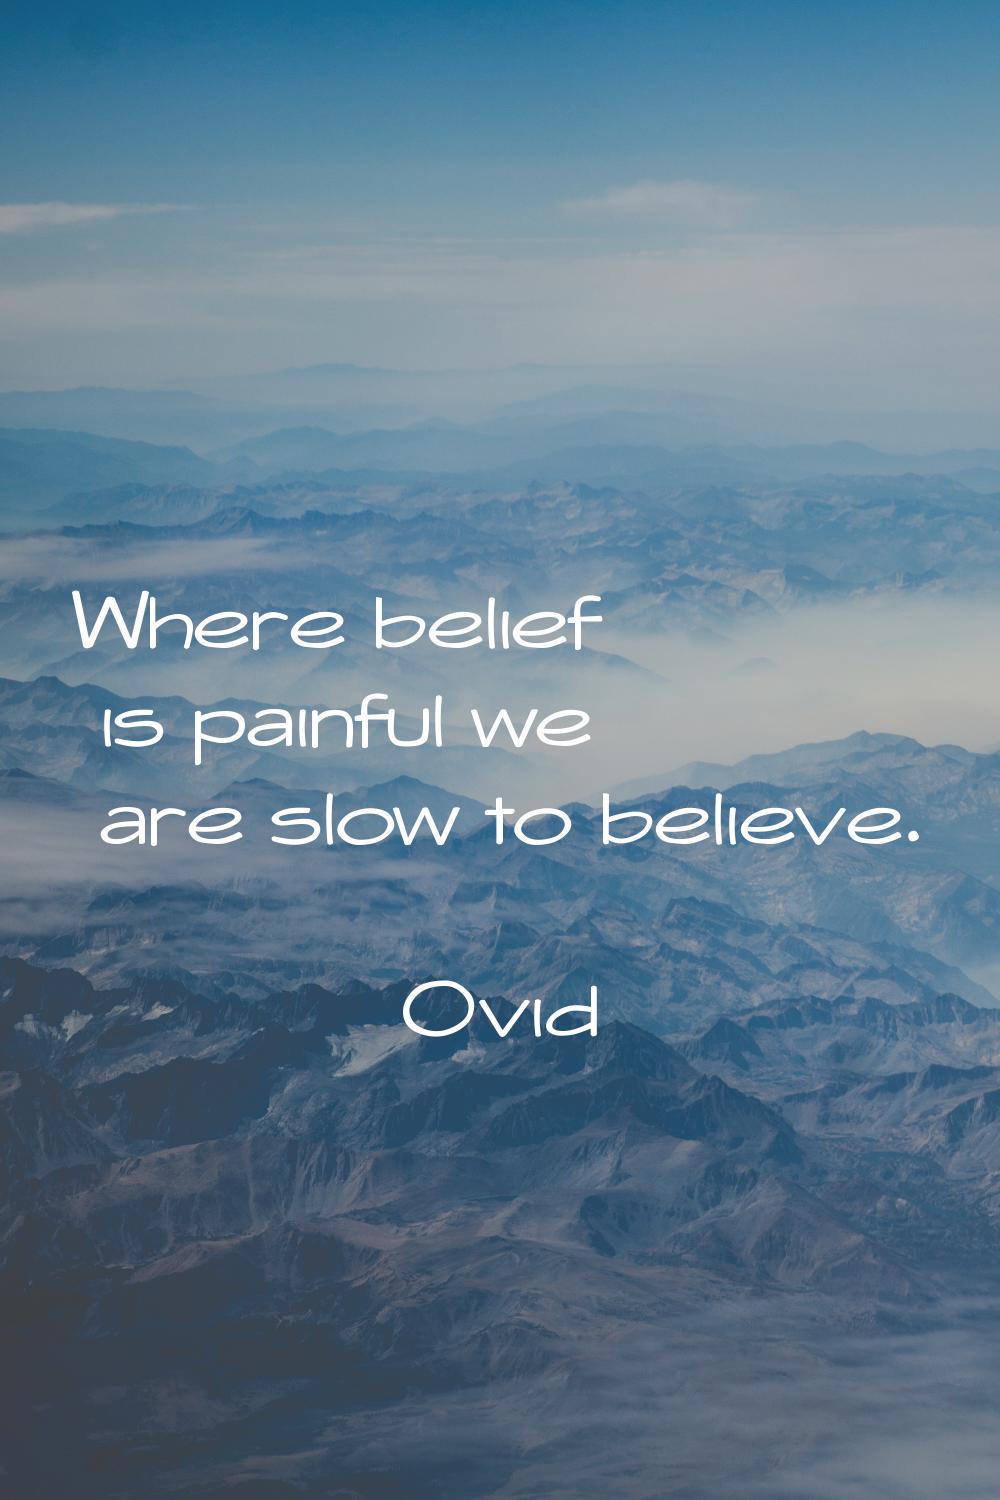 Where belief is painful we are slow to believe.